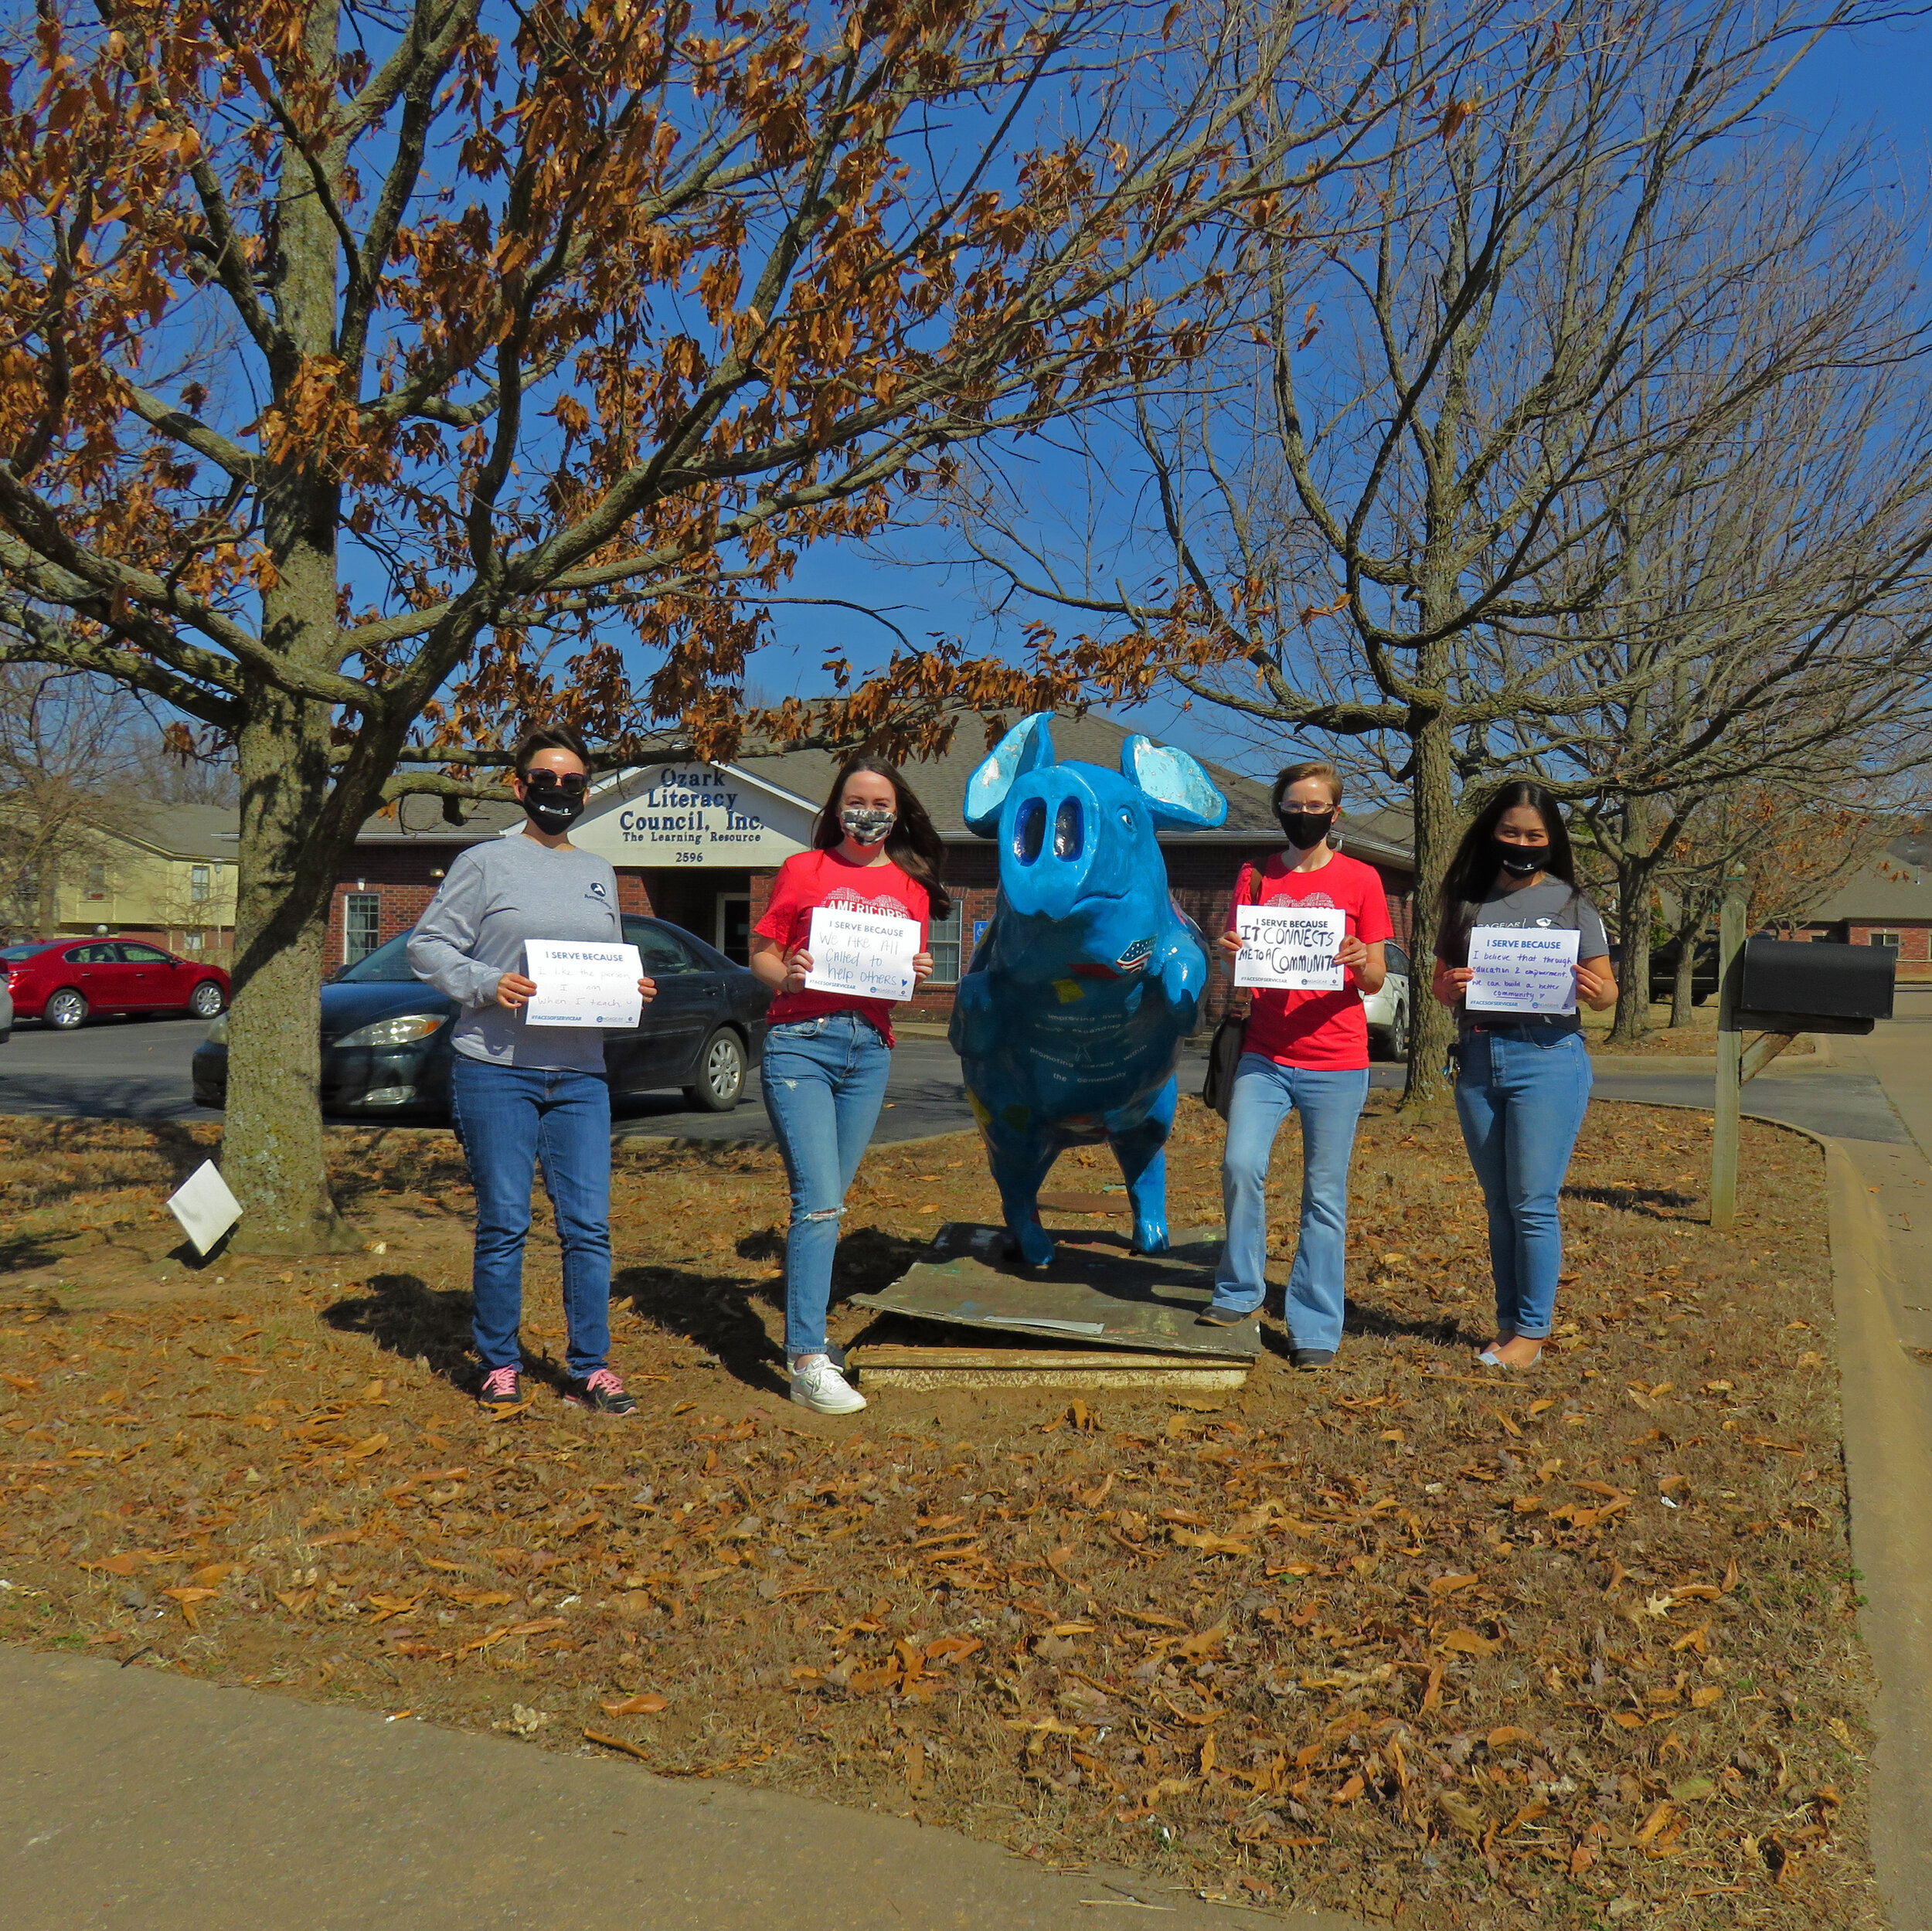 Four Americorps teachers stand by "Freedom" pig at OLC holding signs